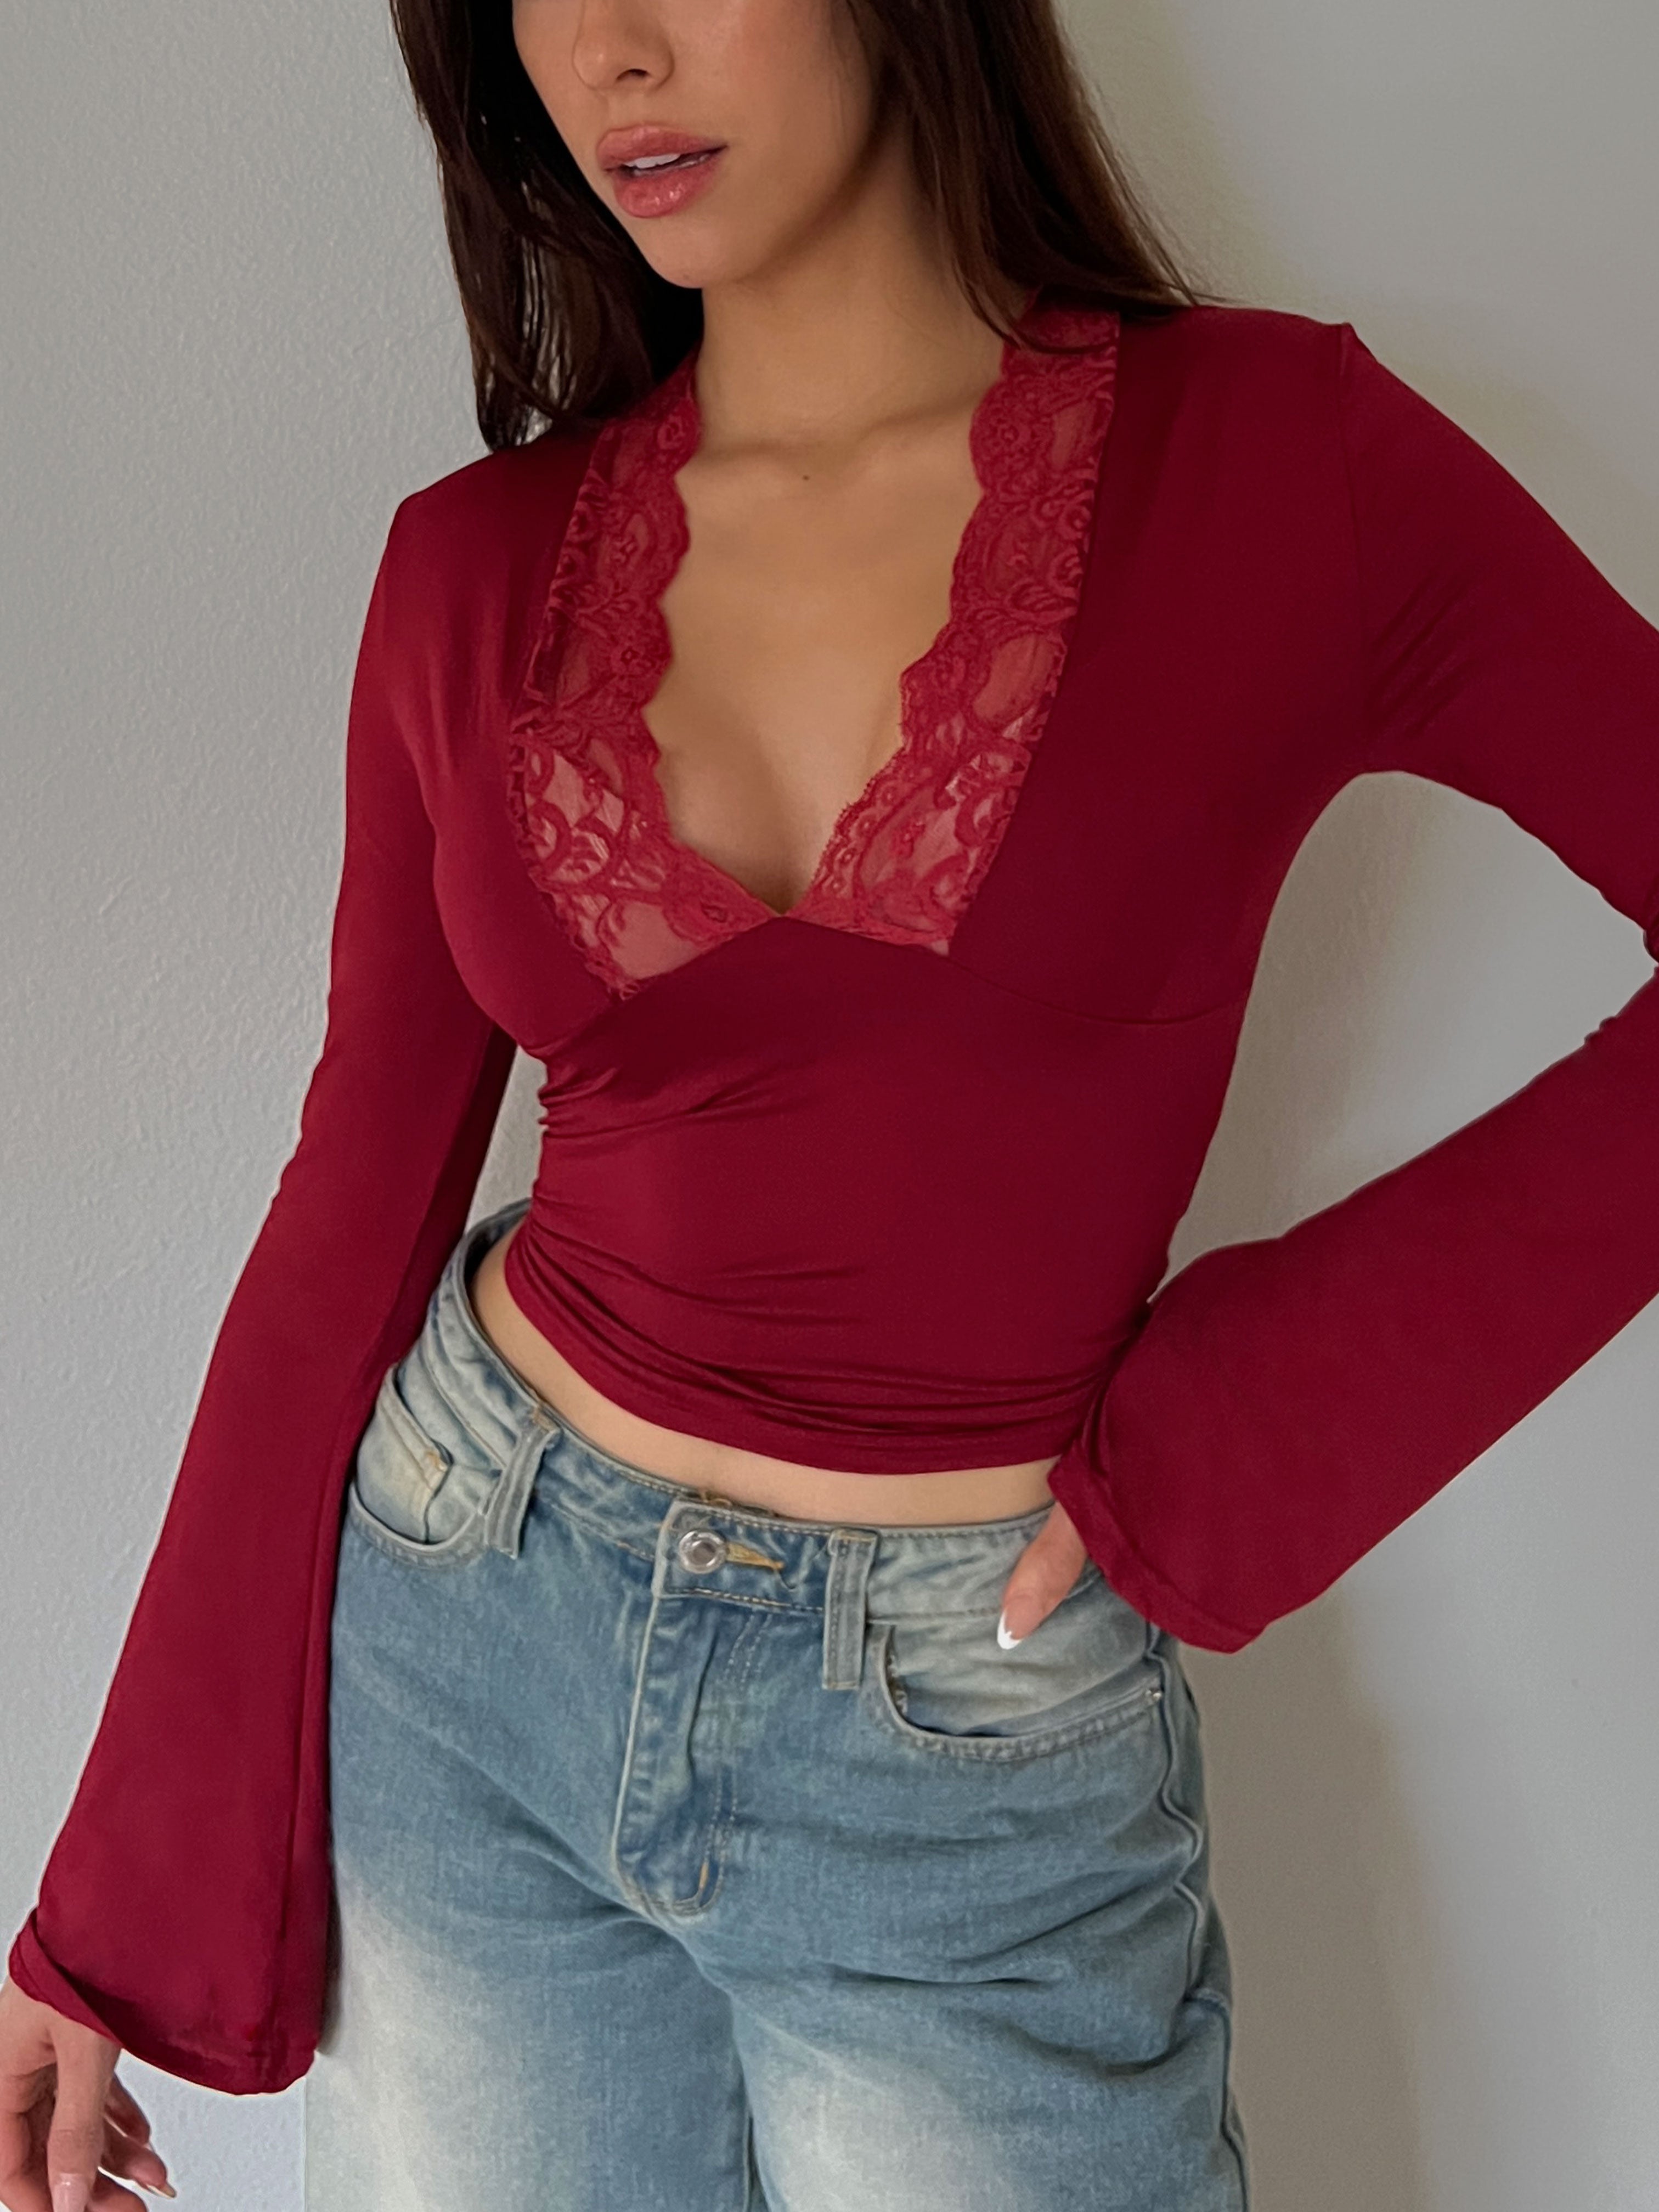 Veyles's Lace Top Perfect Fit Wine Red